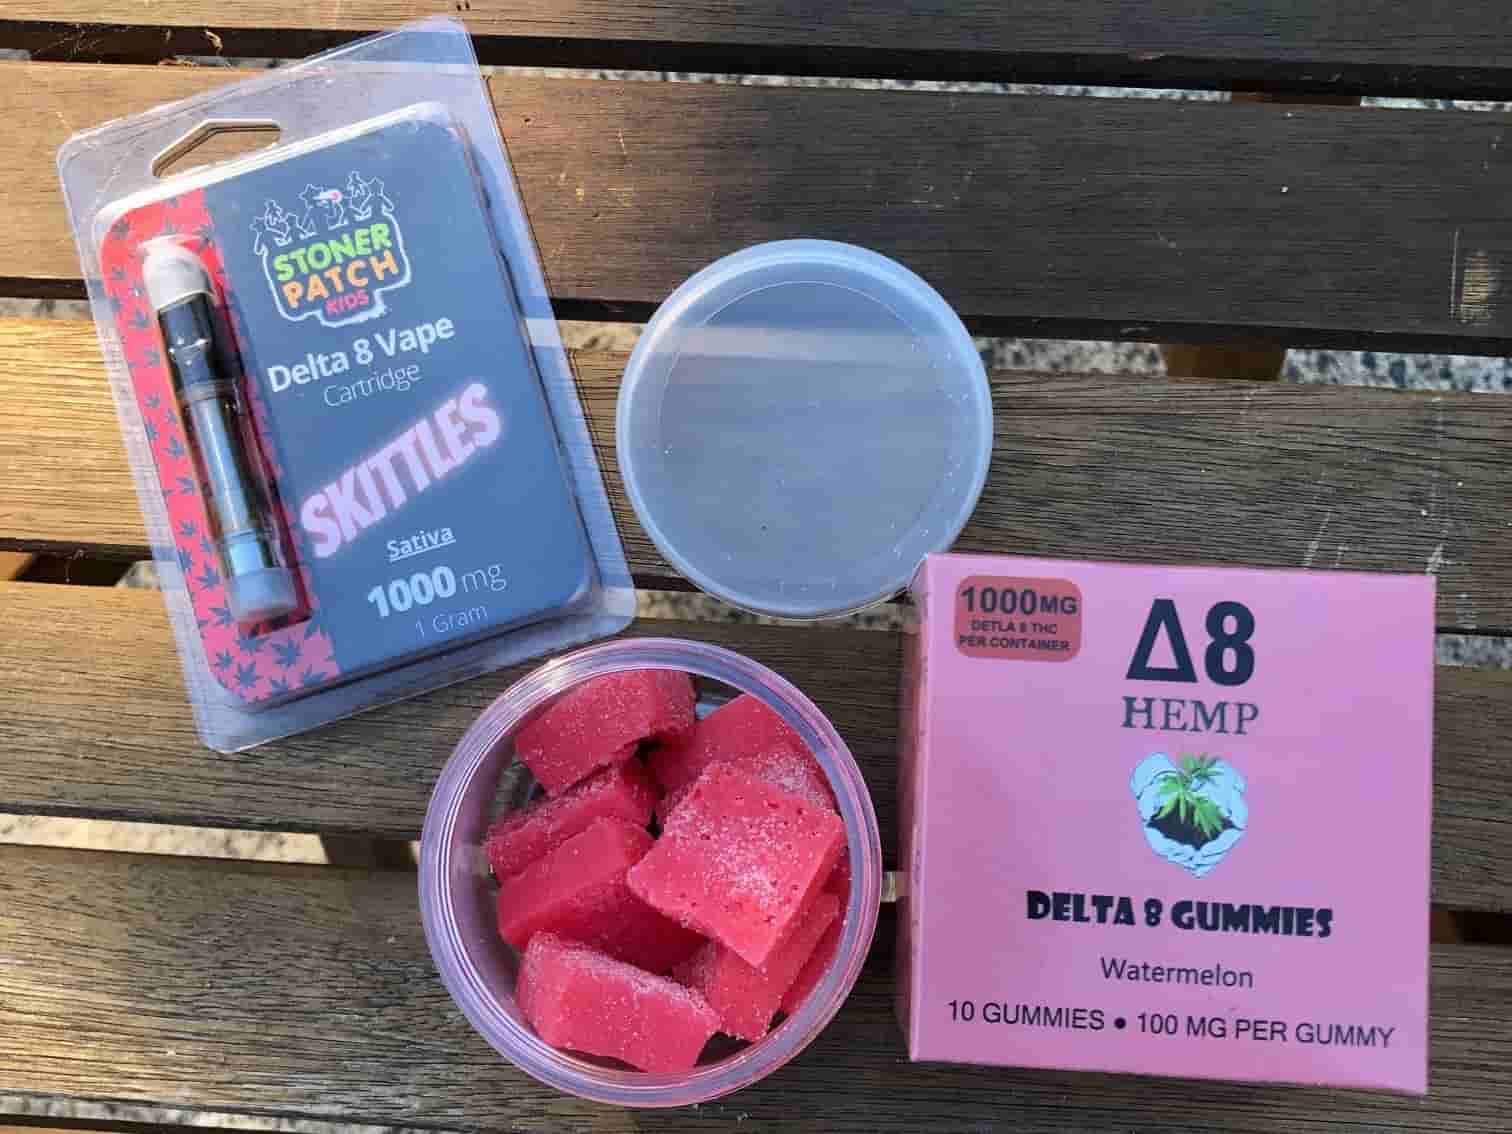 HALO DELTA 8 DISPOSABLE - Gummies|Thc|Products|Hemp|Product|Brand|Effects|Delta|Gummy|Cbd|Origin|Quality|Dosage|Delta-8|Dose|Usasource|Flavors|Brands|Ingredients|Range|Customers|Edibles|Cartridges|Reviews|Side|List|Health|Cannabis|Lab|Customer|Options|Benefits|Overviewproducts|Research|Time|Market|Drug|Farms|Party|People|Delta-8 Thc|Delta-8 Products|Delta-9 Thc|Delta-8 Gummies|Delta-8 Thc Products|Delta-8 Brands|Customer Reviews|Brand Overviewproducts|Drug Tests|Free Shipping|Similar Benefits|Vape Cartridges|Hemp Doctor|United States|Third Party Lab|Drug Test|Thc Edibles|Health Canada|Cannabis Plant|Side Effects|Organic Hemp|Diamond Cbd|Reaction Time|Legal Hemp|Psychoactive Effects|Psychoactive Properties|Third Party|Dry Eyes|Delta-8 Market|Tolerance Level